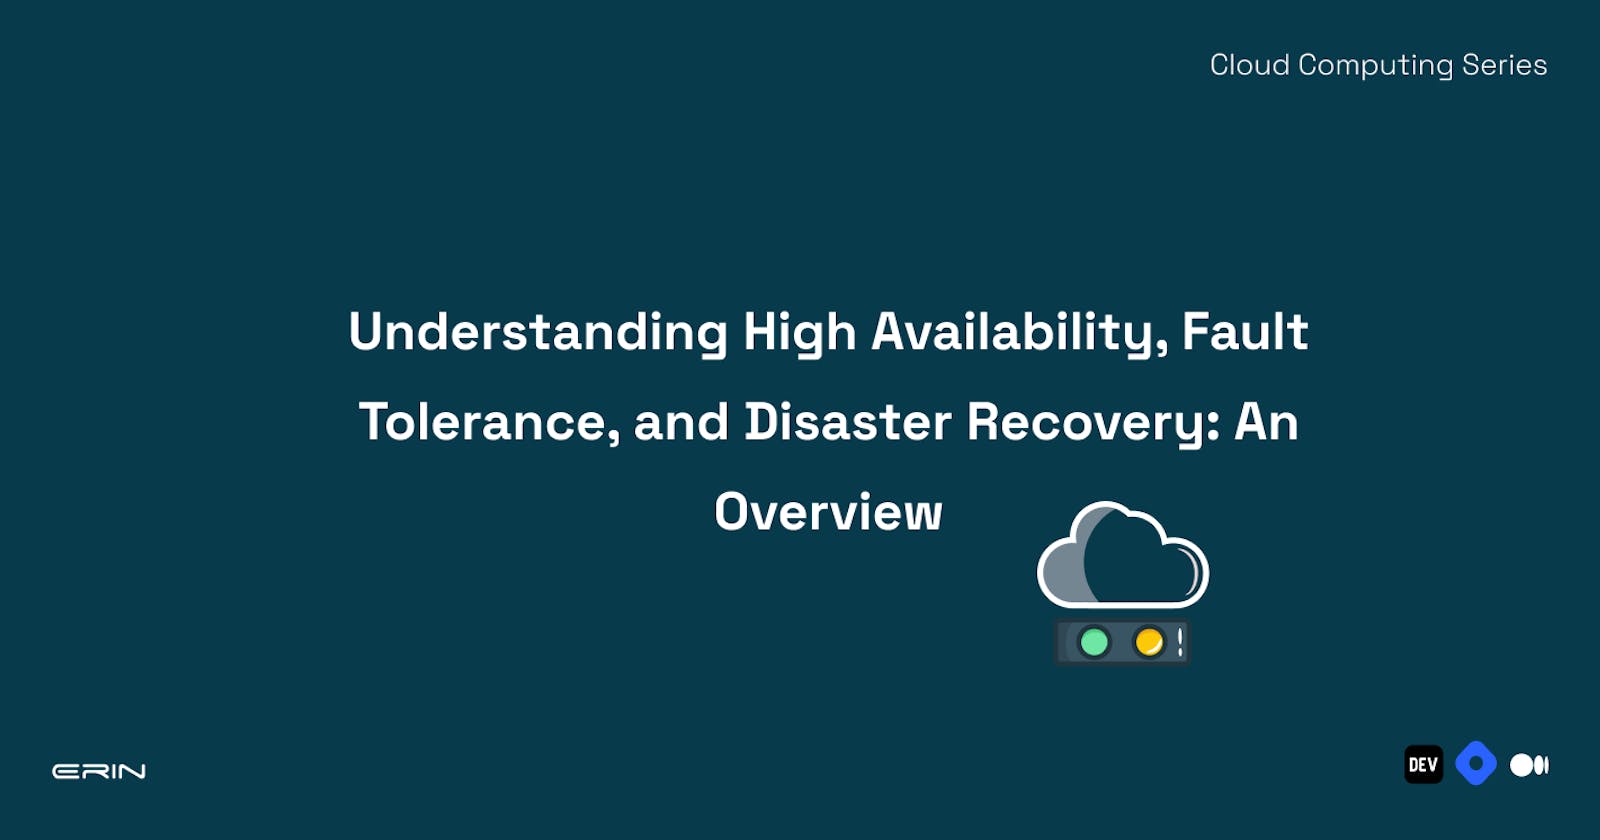 Understanding High Availability, Fault Tolerance, and Disaster Recovery in AWS: An Overview